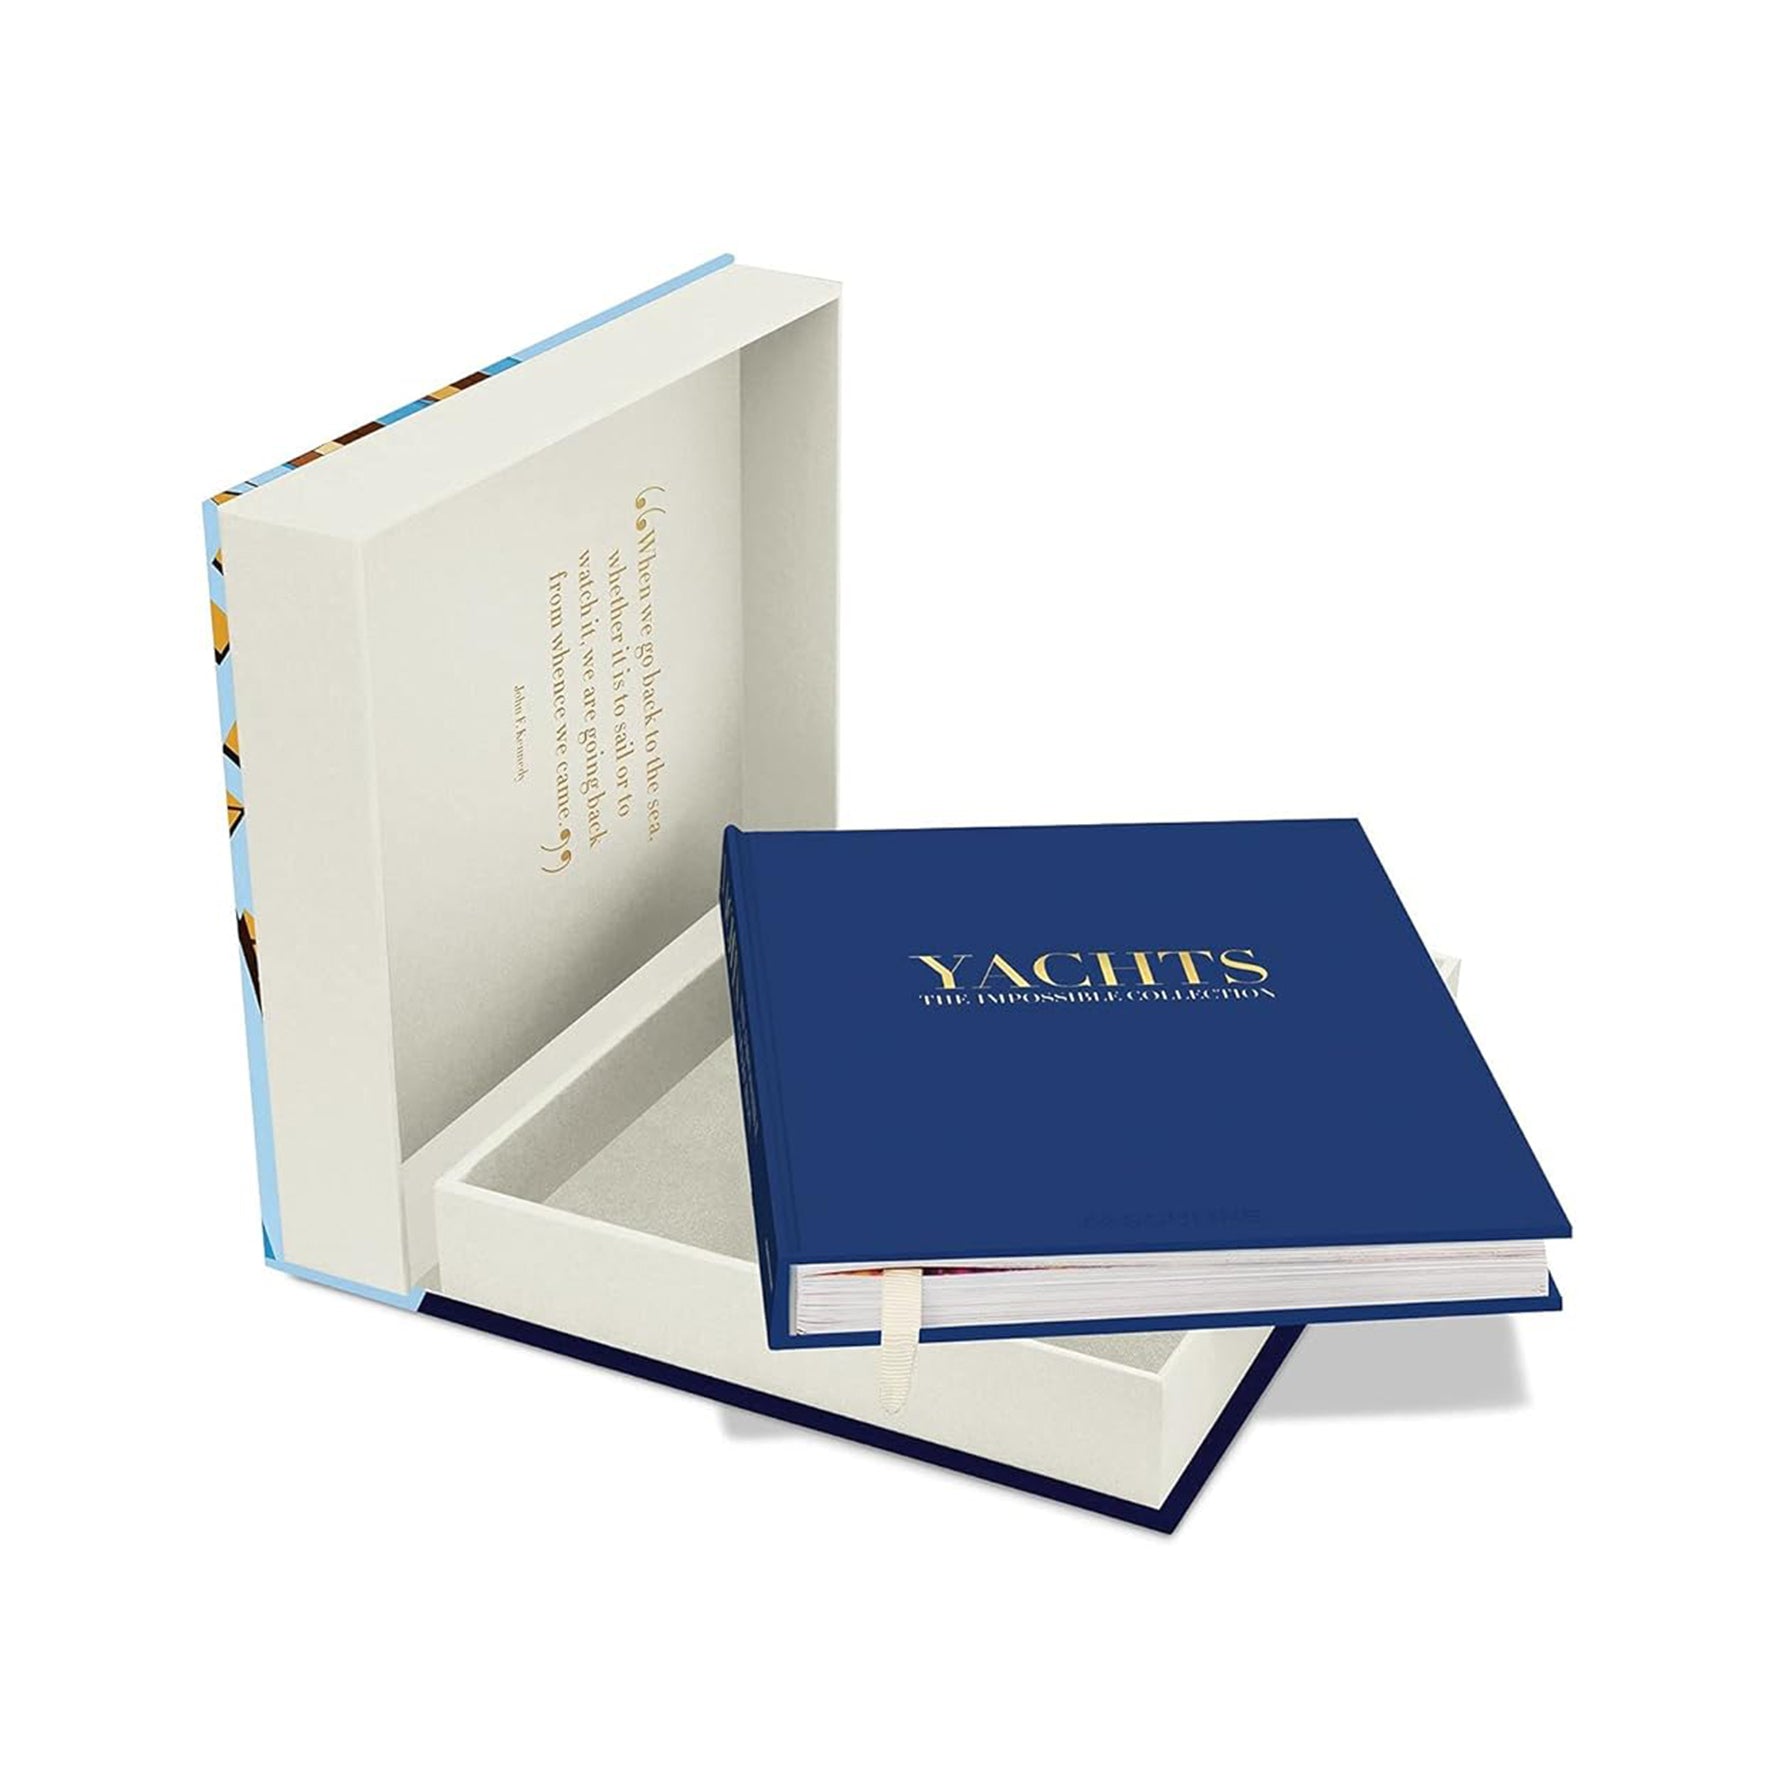 Yachts: The Impossible Collection by Assouline